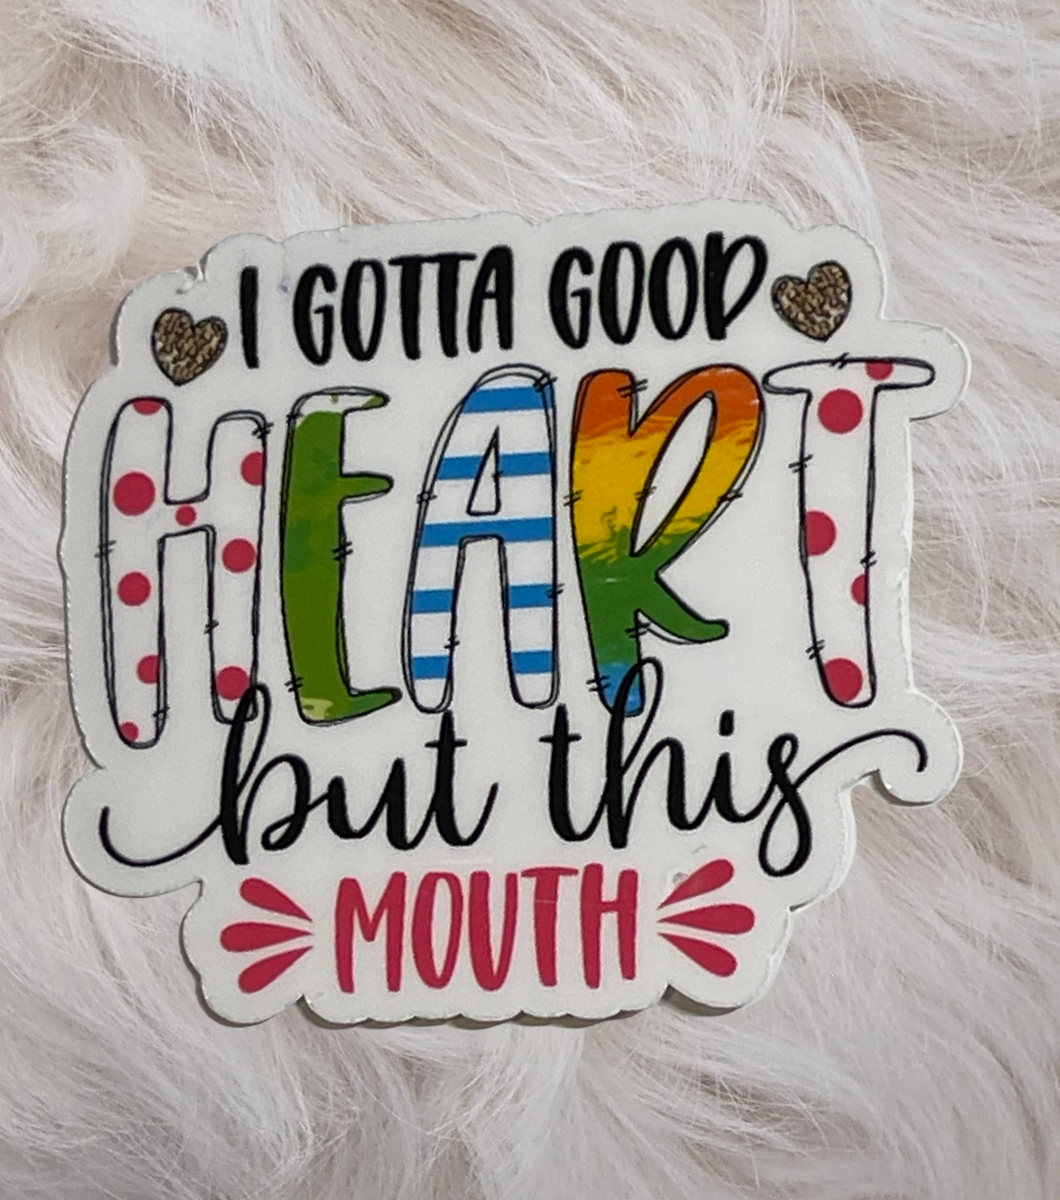 Sarcastic Series Sticker: I Gotta Good Heart But This Mouth